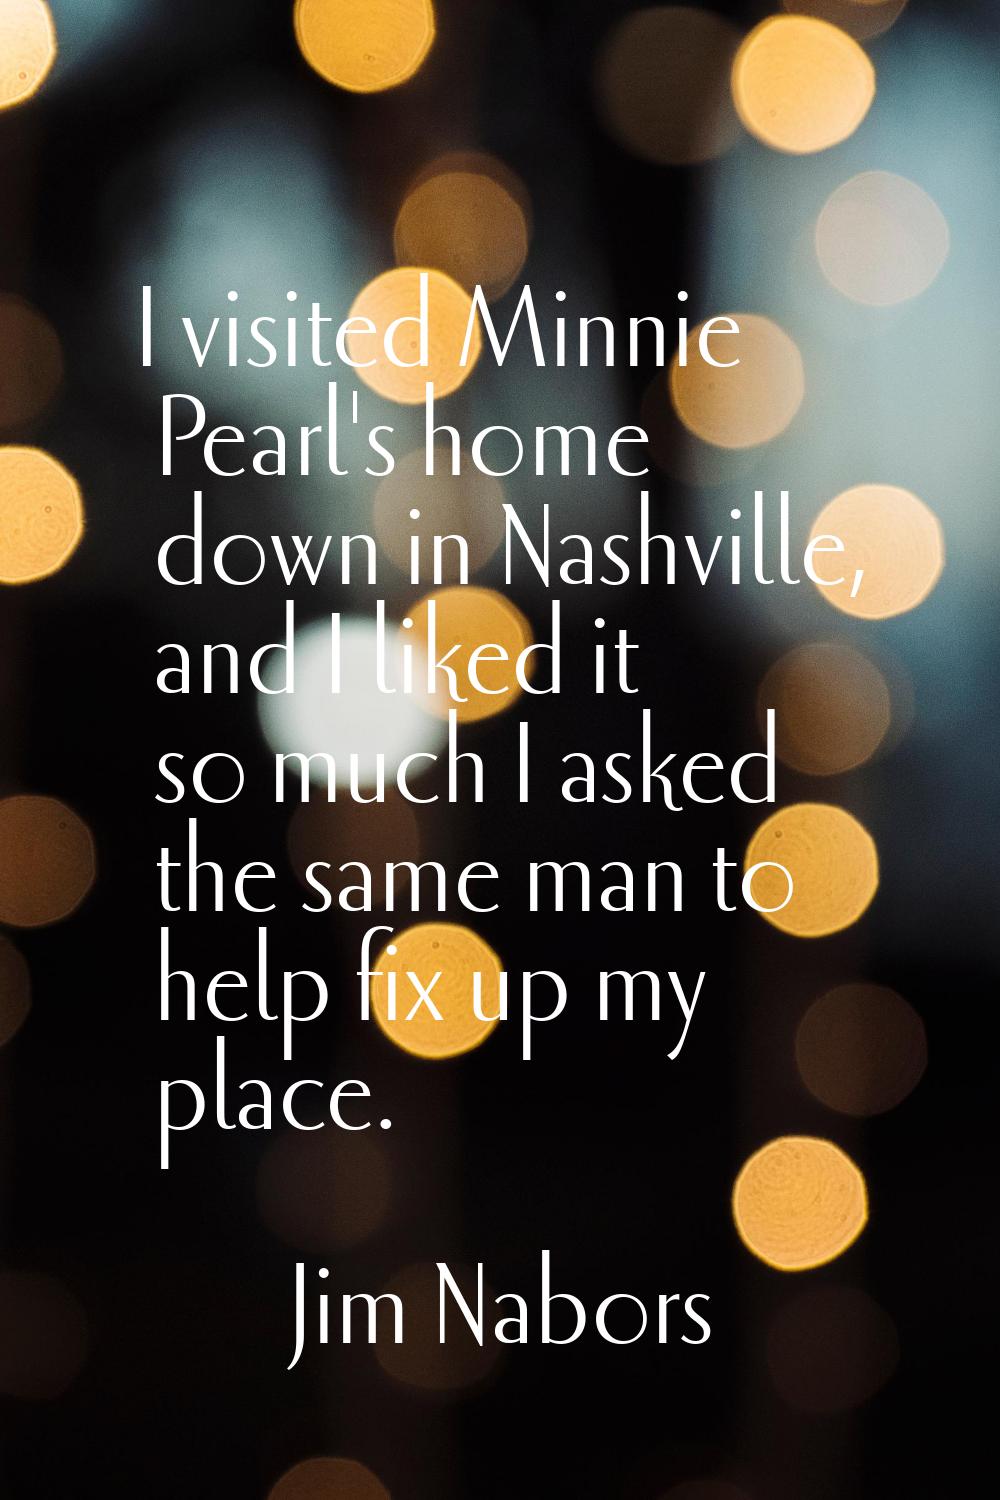 I visited Minnie Pearl's home down in Nashville, and I liked it so much I asked the same man to hel